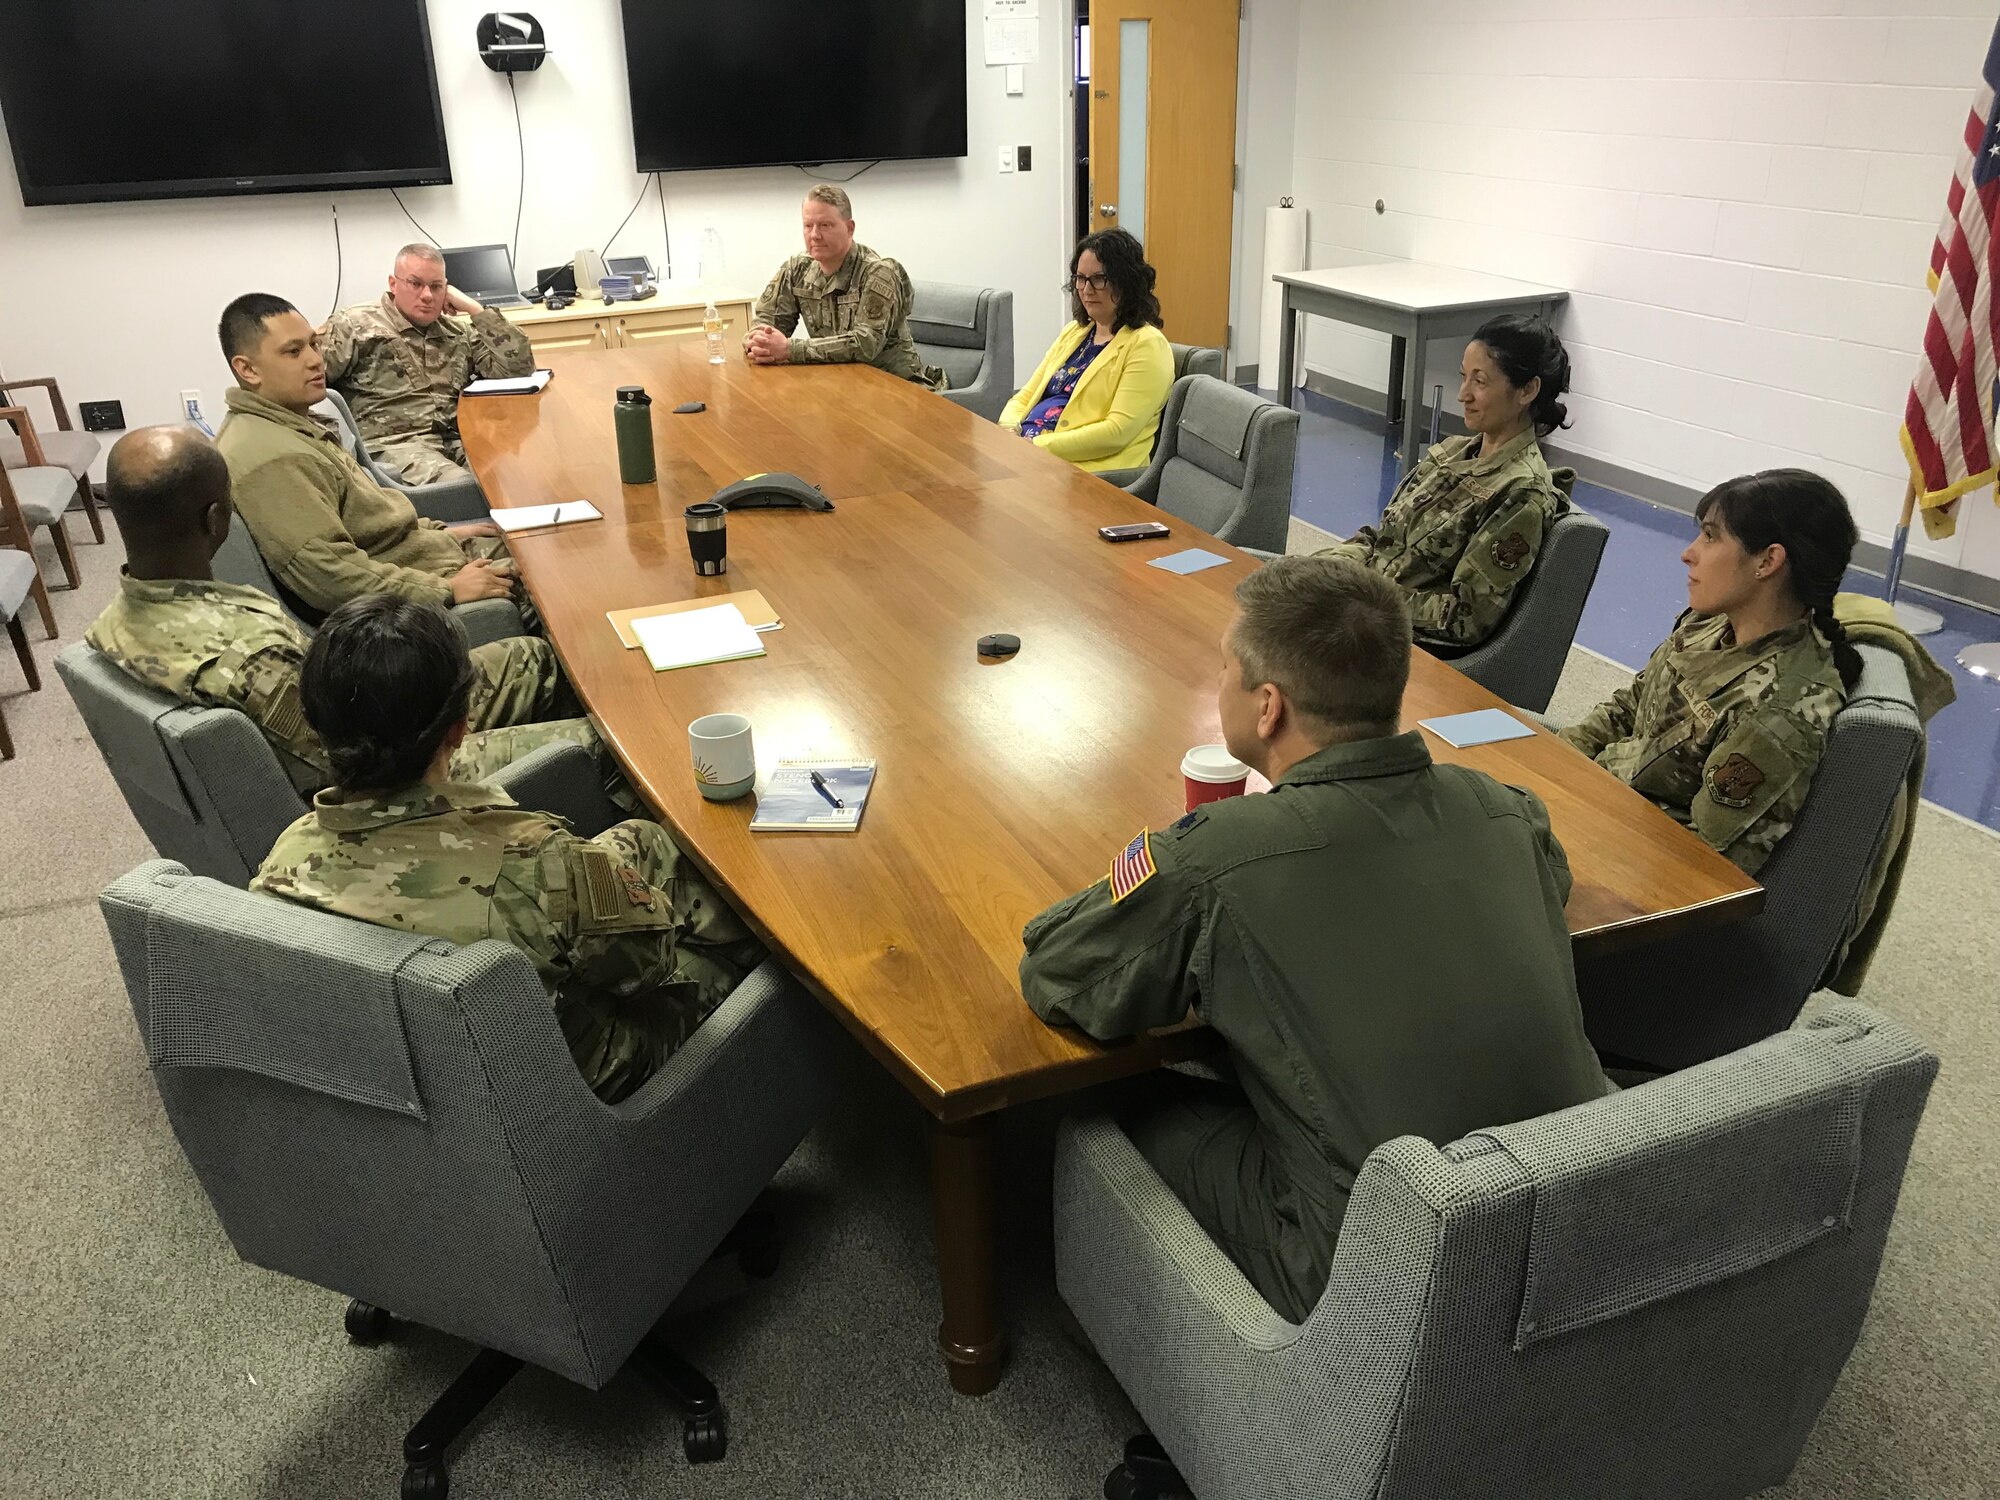 Airmen meet for the first 167th Airlift Wing Heritage and Diversity Council meeting in the wing conference room, Shepherd Field, Martinsburg, West Virginia, April 3, 2022. The council will plan activities and events to highlight the diverse backgrounds and cultures of the wing.